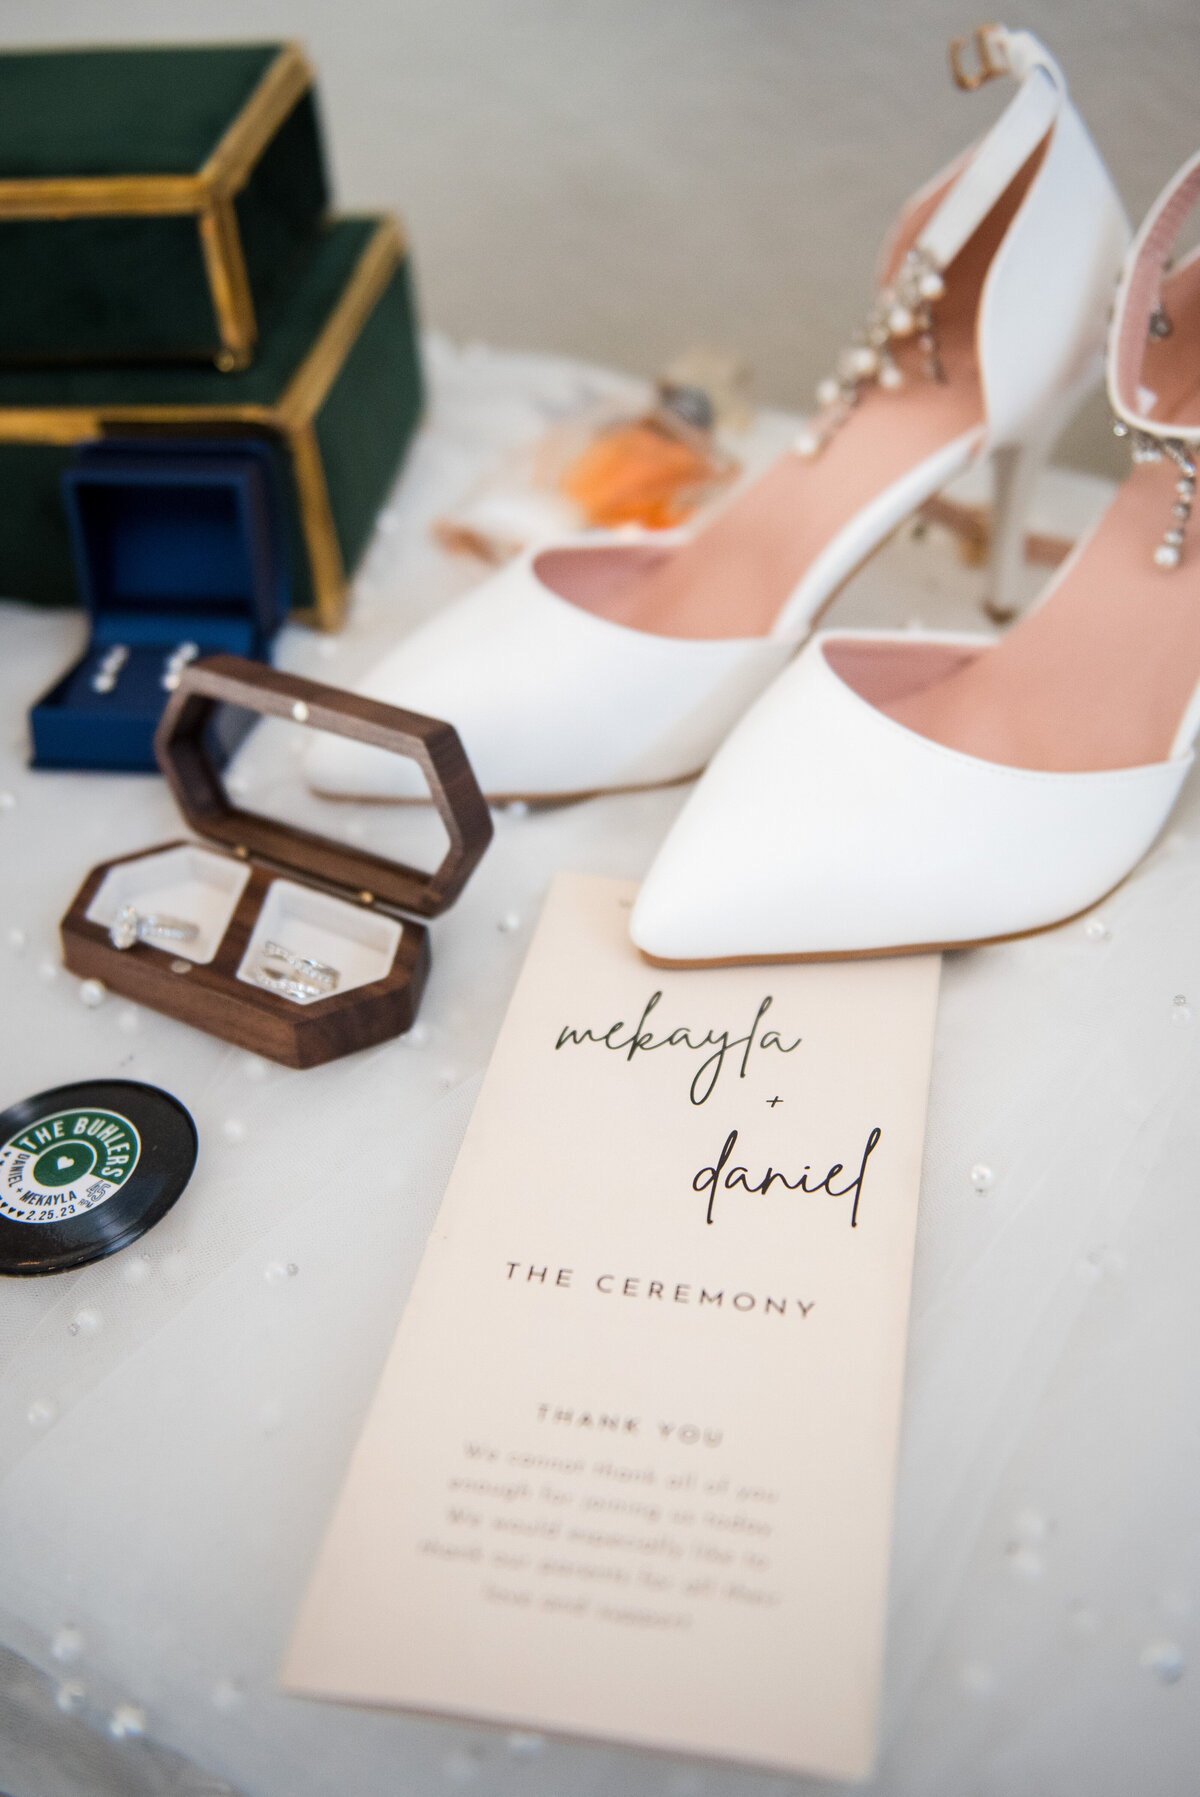 A collection of wedding details including a ceremony program, heels, and jewelry, captured by Denver wedding photographer, Two One Photography.